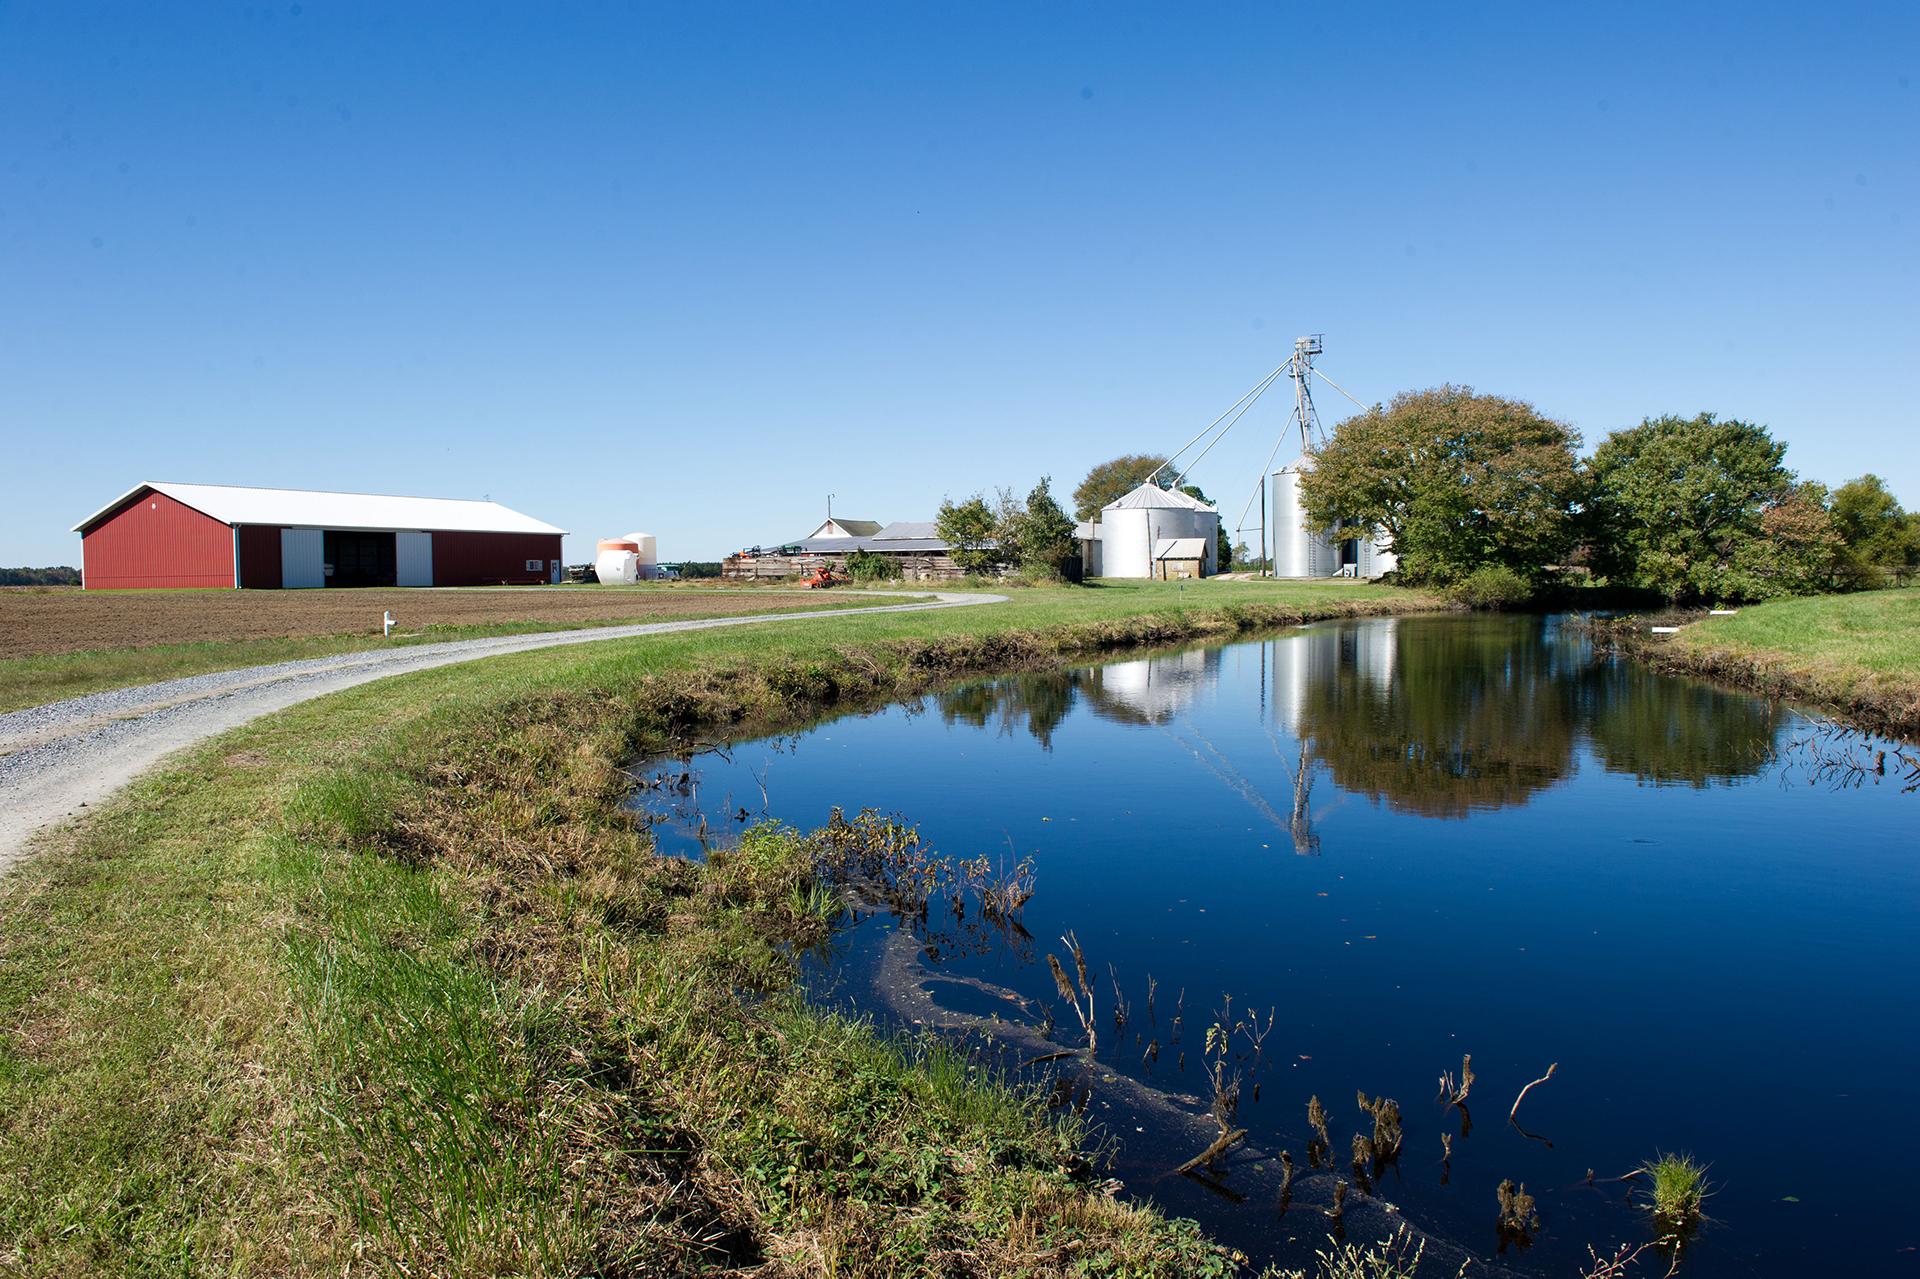 Farm land with a pond in the foreground and red barn and gray silos in the background